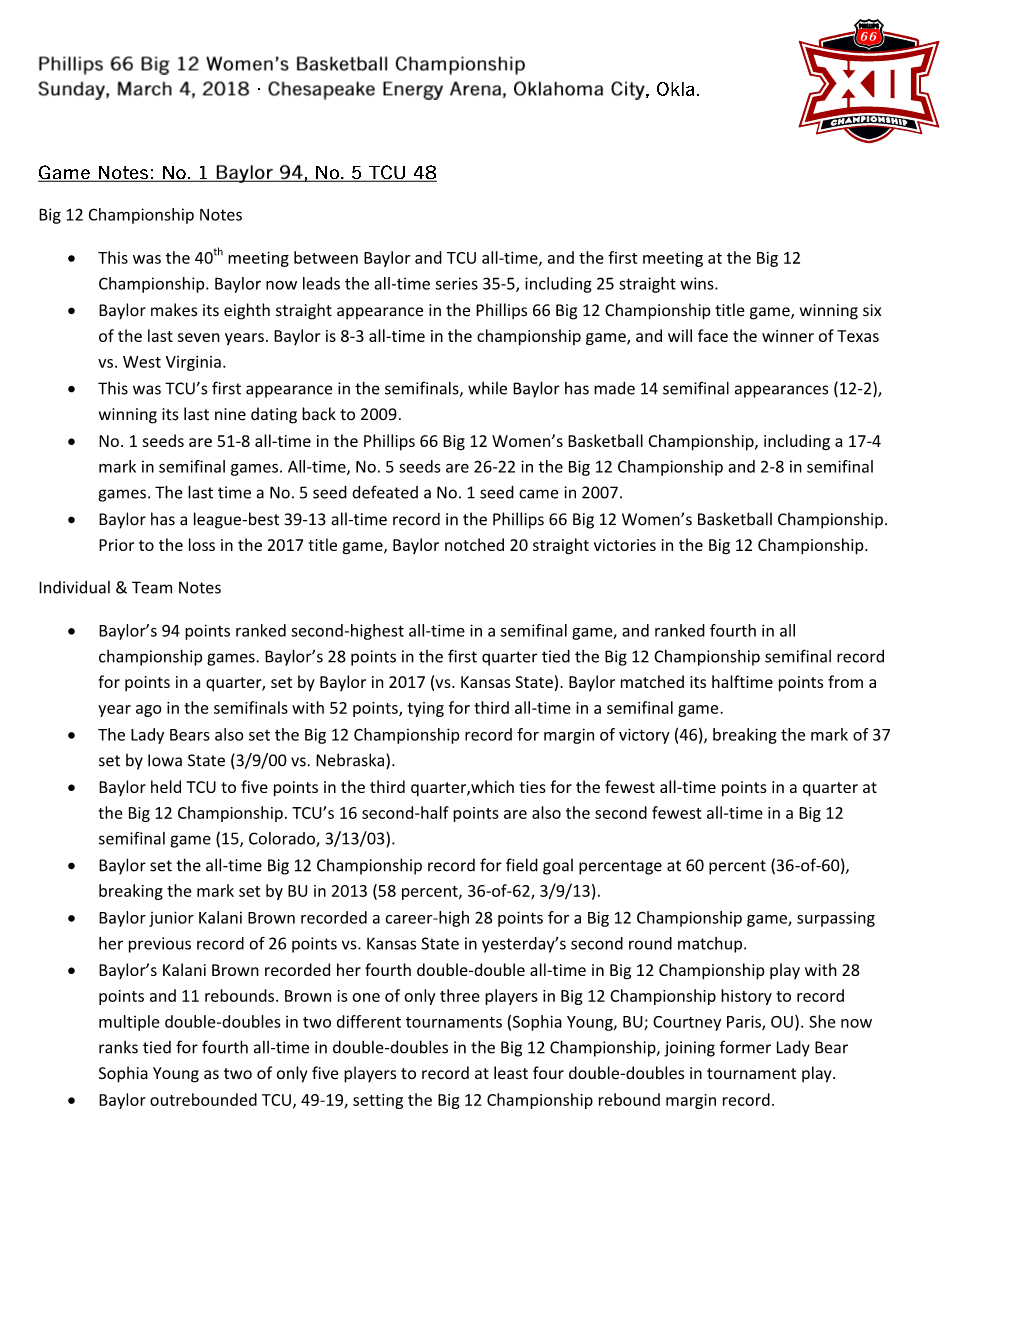 Big 12 Championship Notes • This Was the 40Th Meeting Between